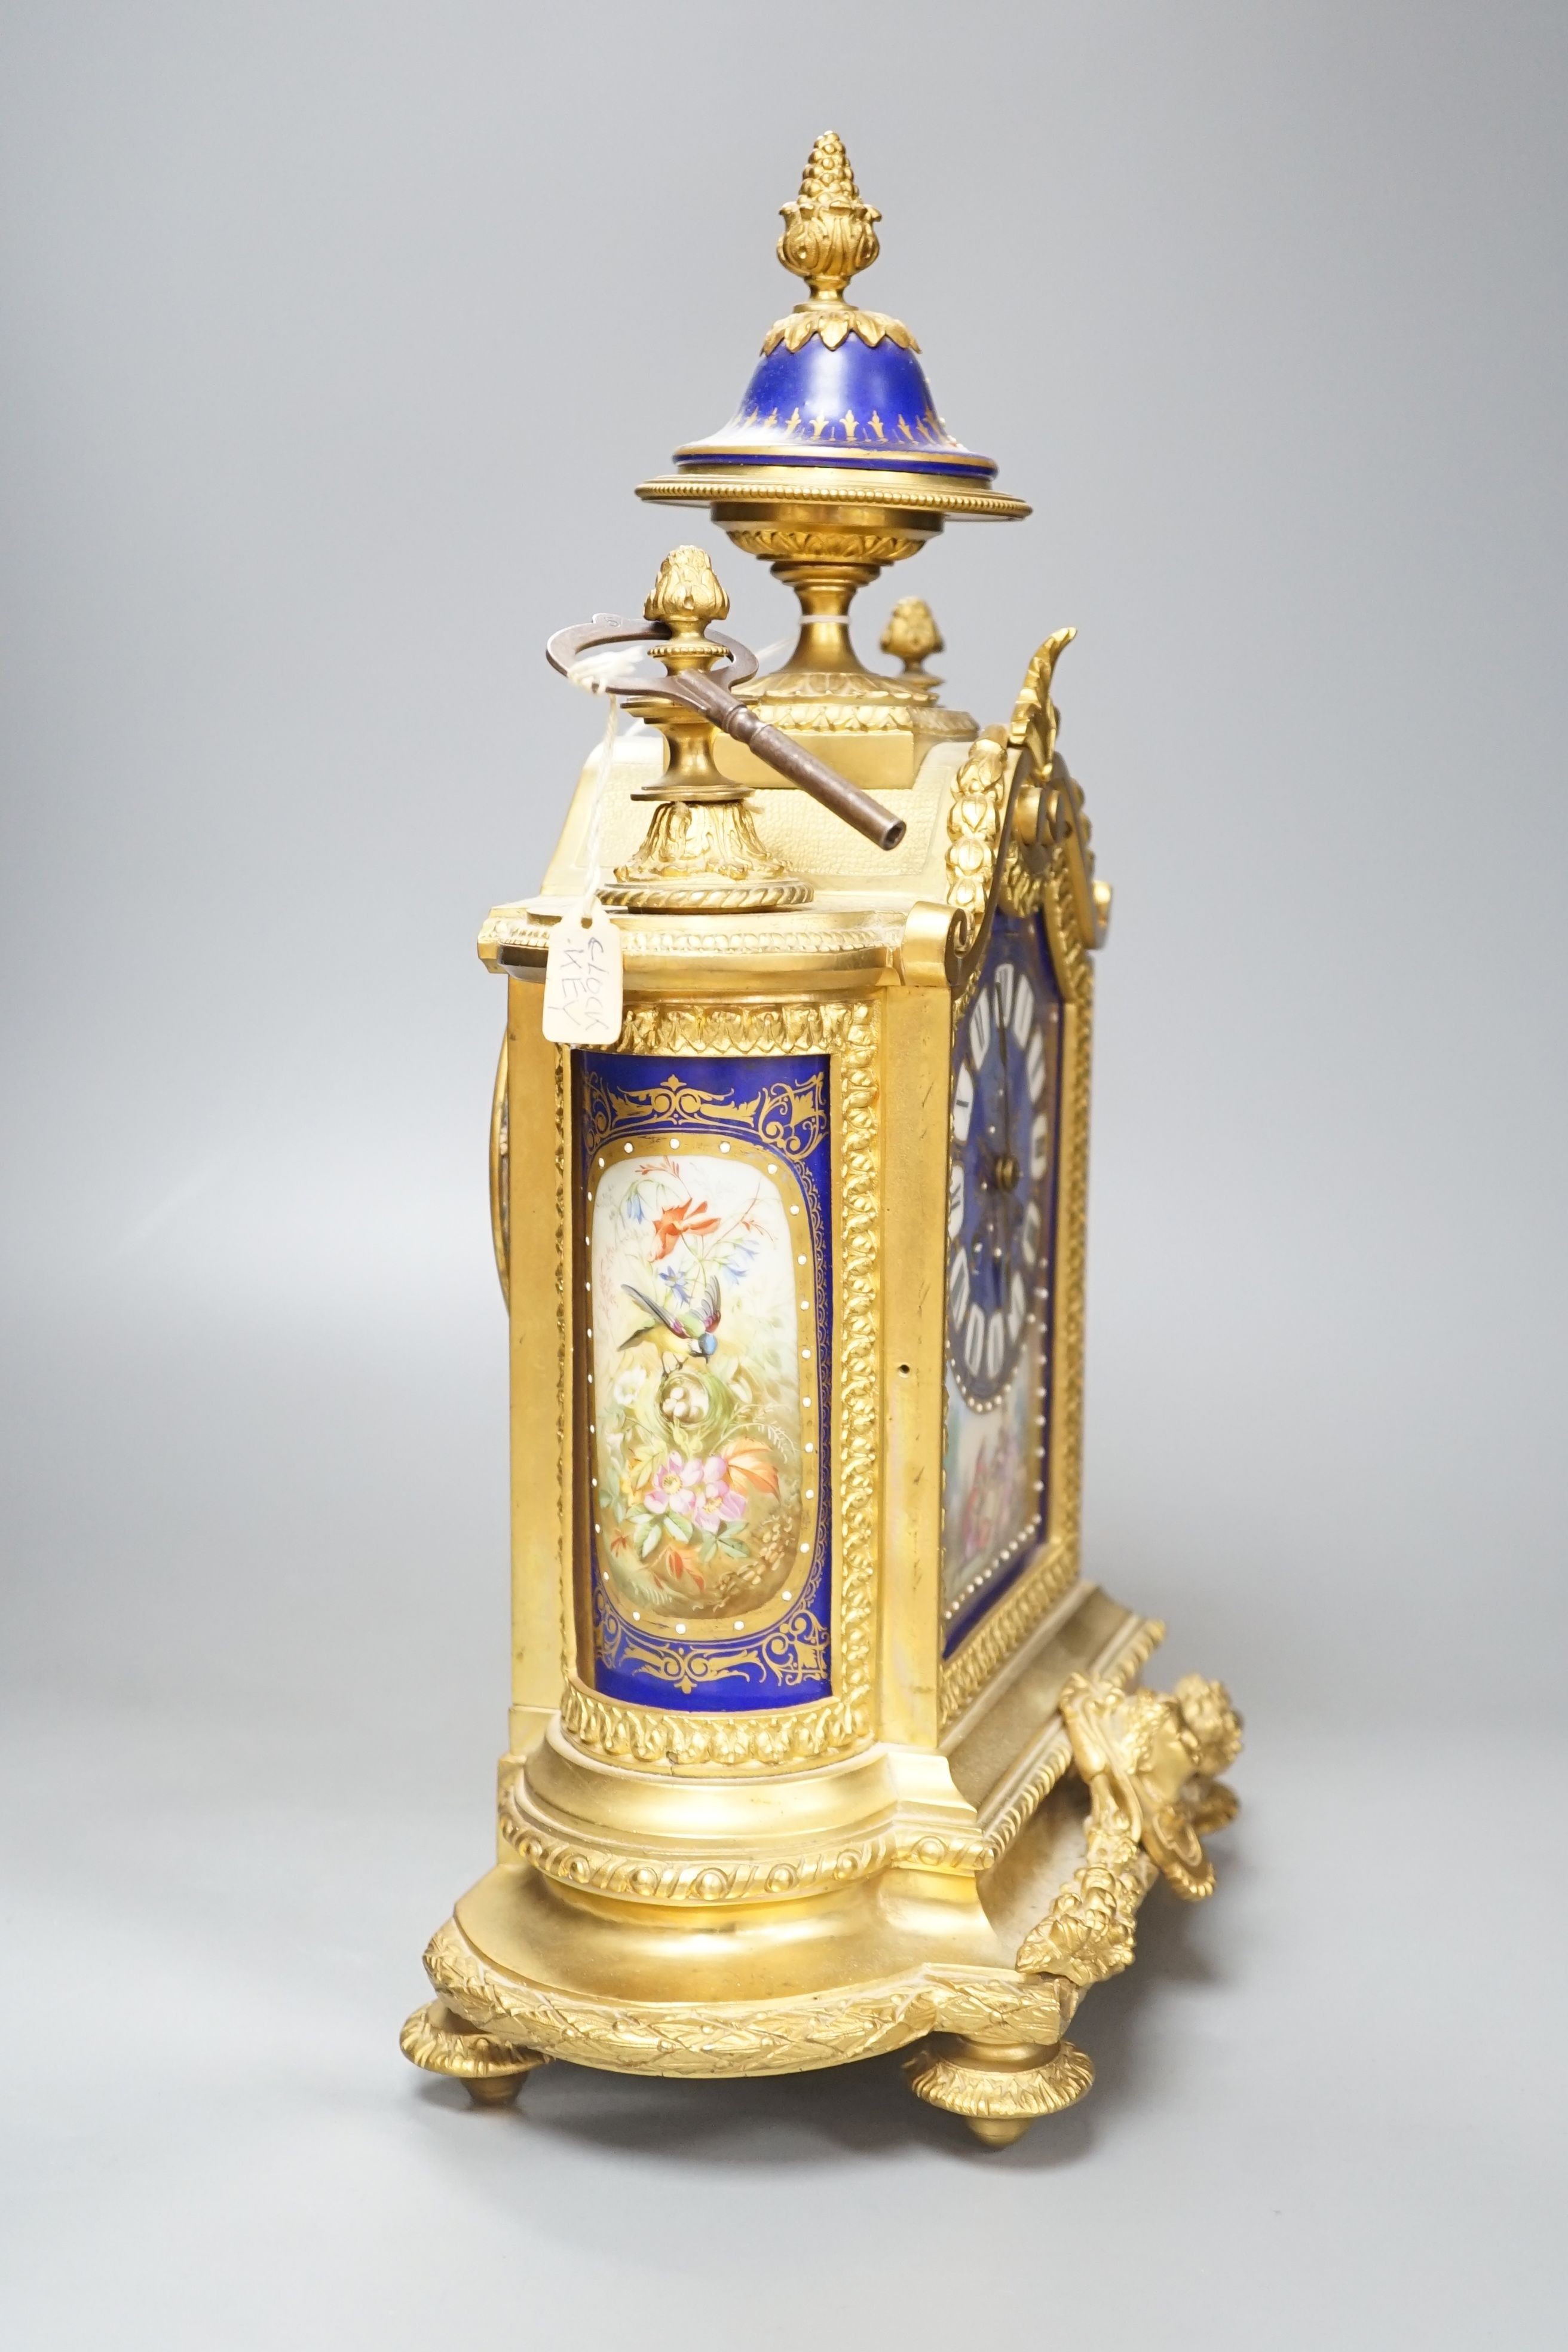 A 19th century French ormolu cased mantel clock, with decorated porcelain panels and face, eight day movement with strike, 40cm high